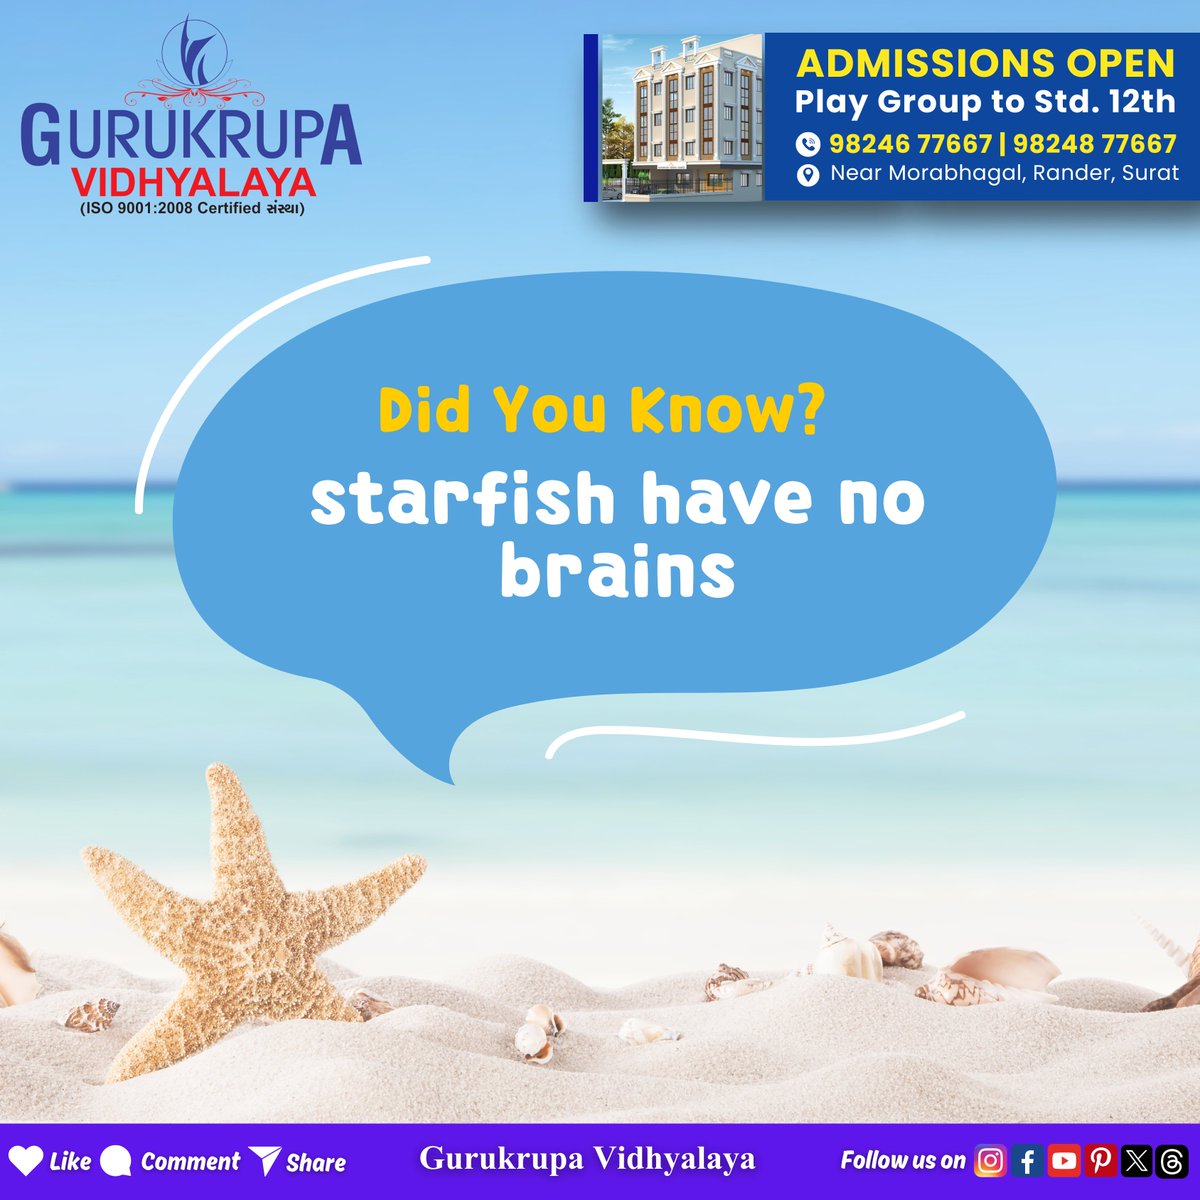 Welcome to Gurukrupa Vidhyalaya! Admissions open for a promising journey towards knowledge with our experienced faculty. Join us for a bright future today!

#schooladmissions2024 #Admissions2024 #suratcity #factsonly